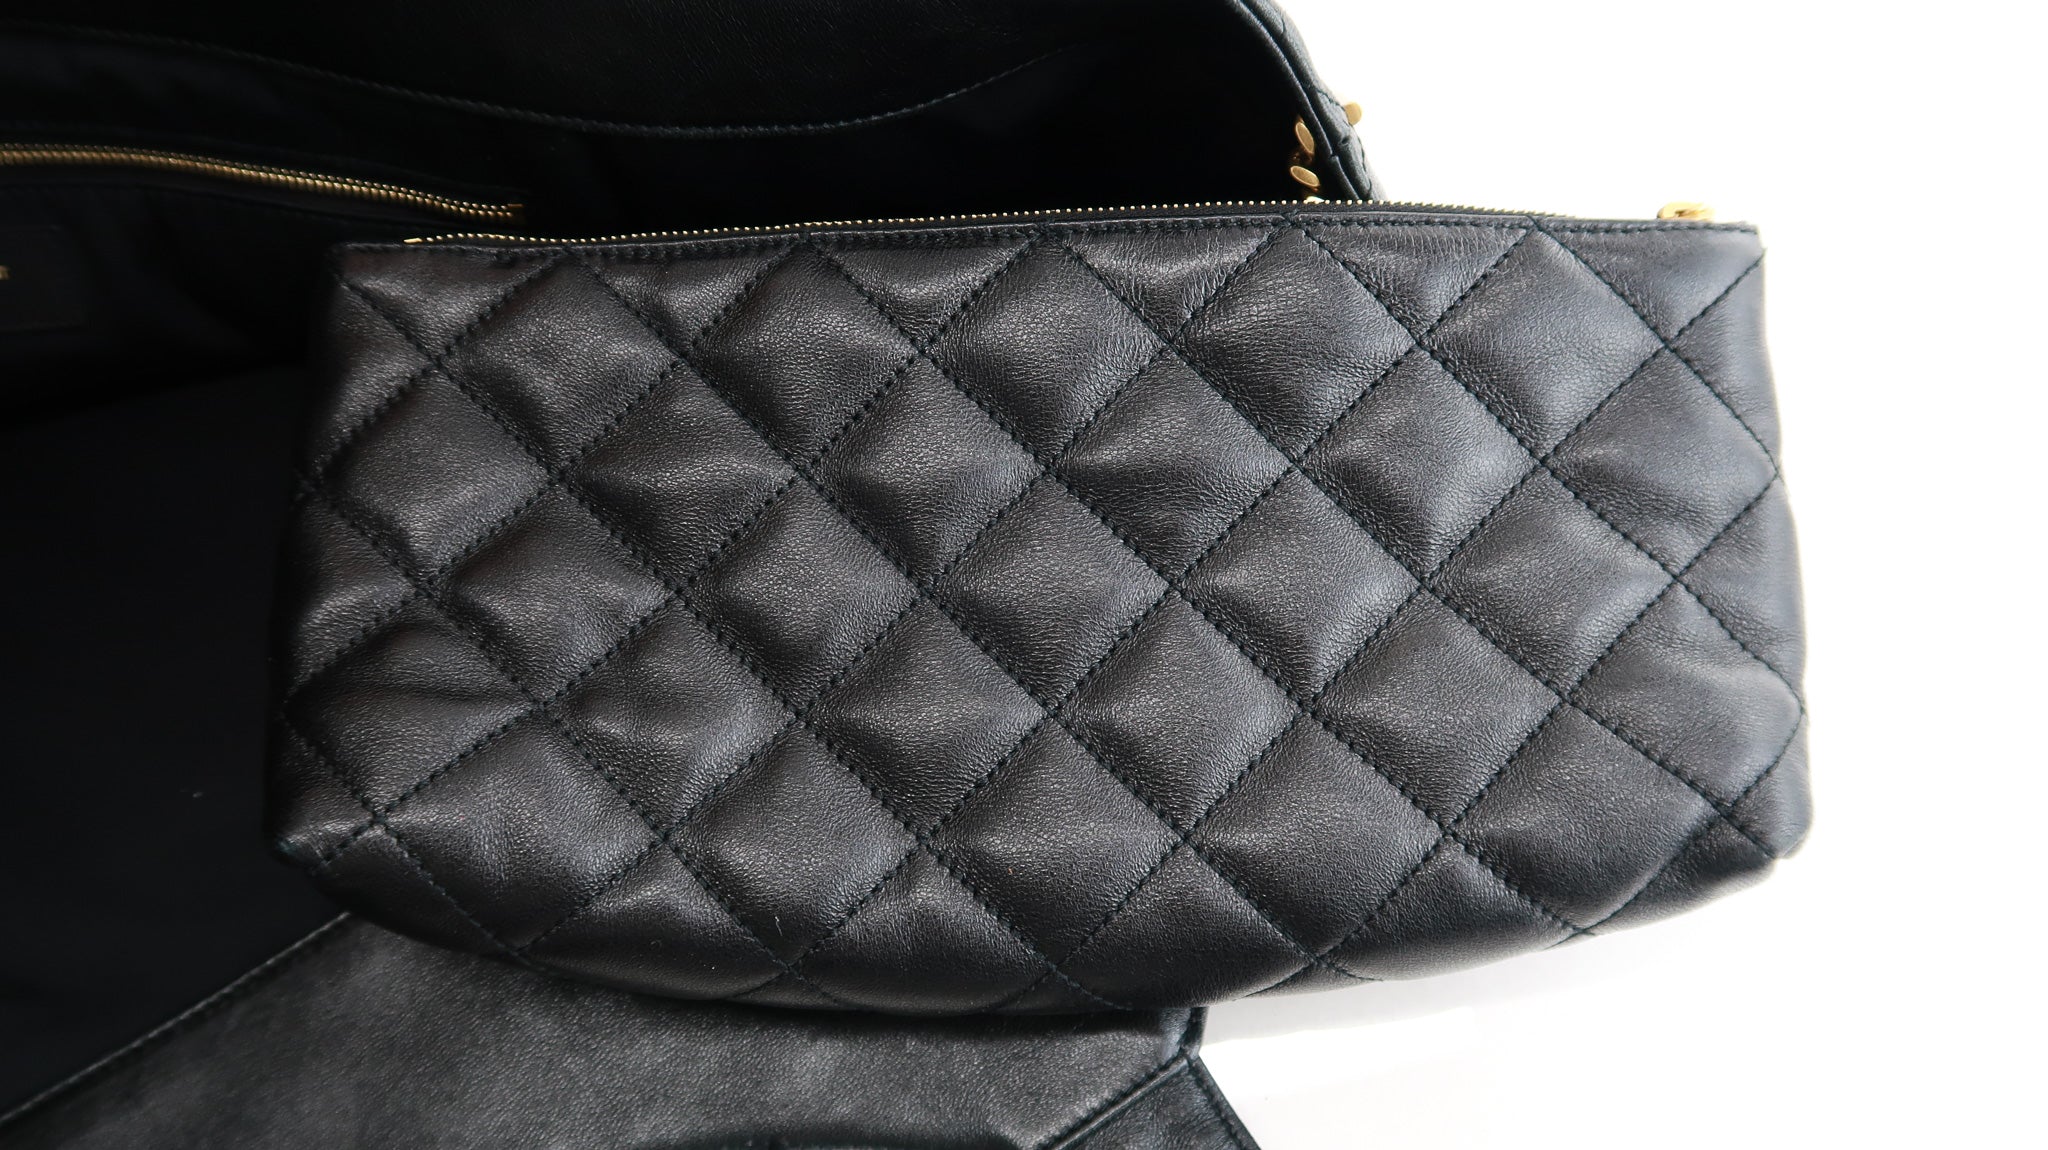 Saint Laurent Maxi Icare Quilted Tote Bag - Farfetch